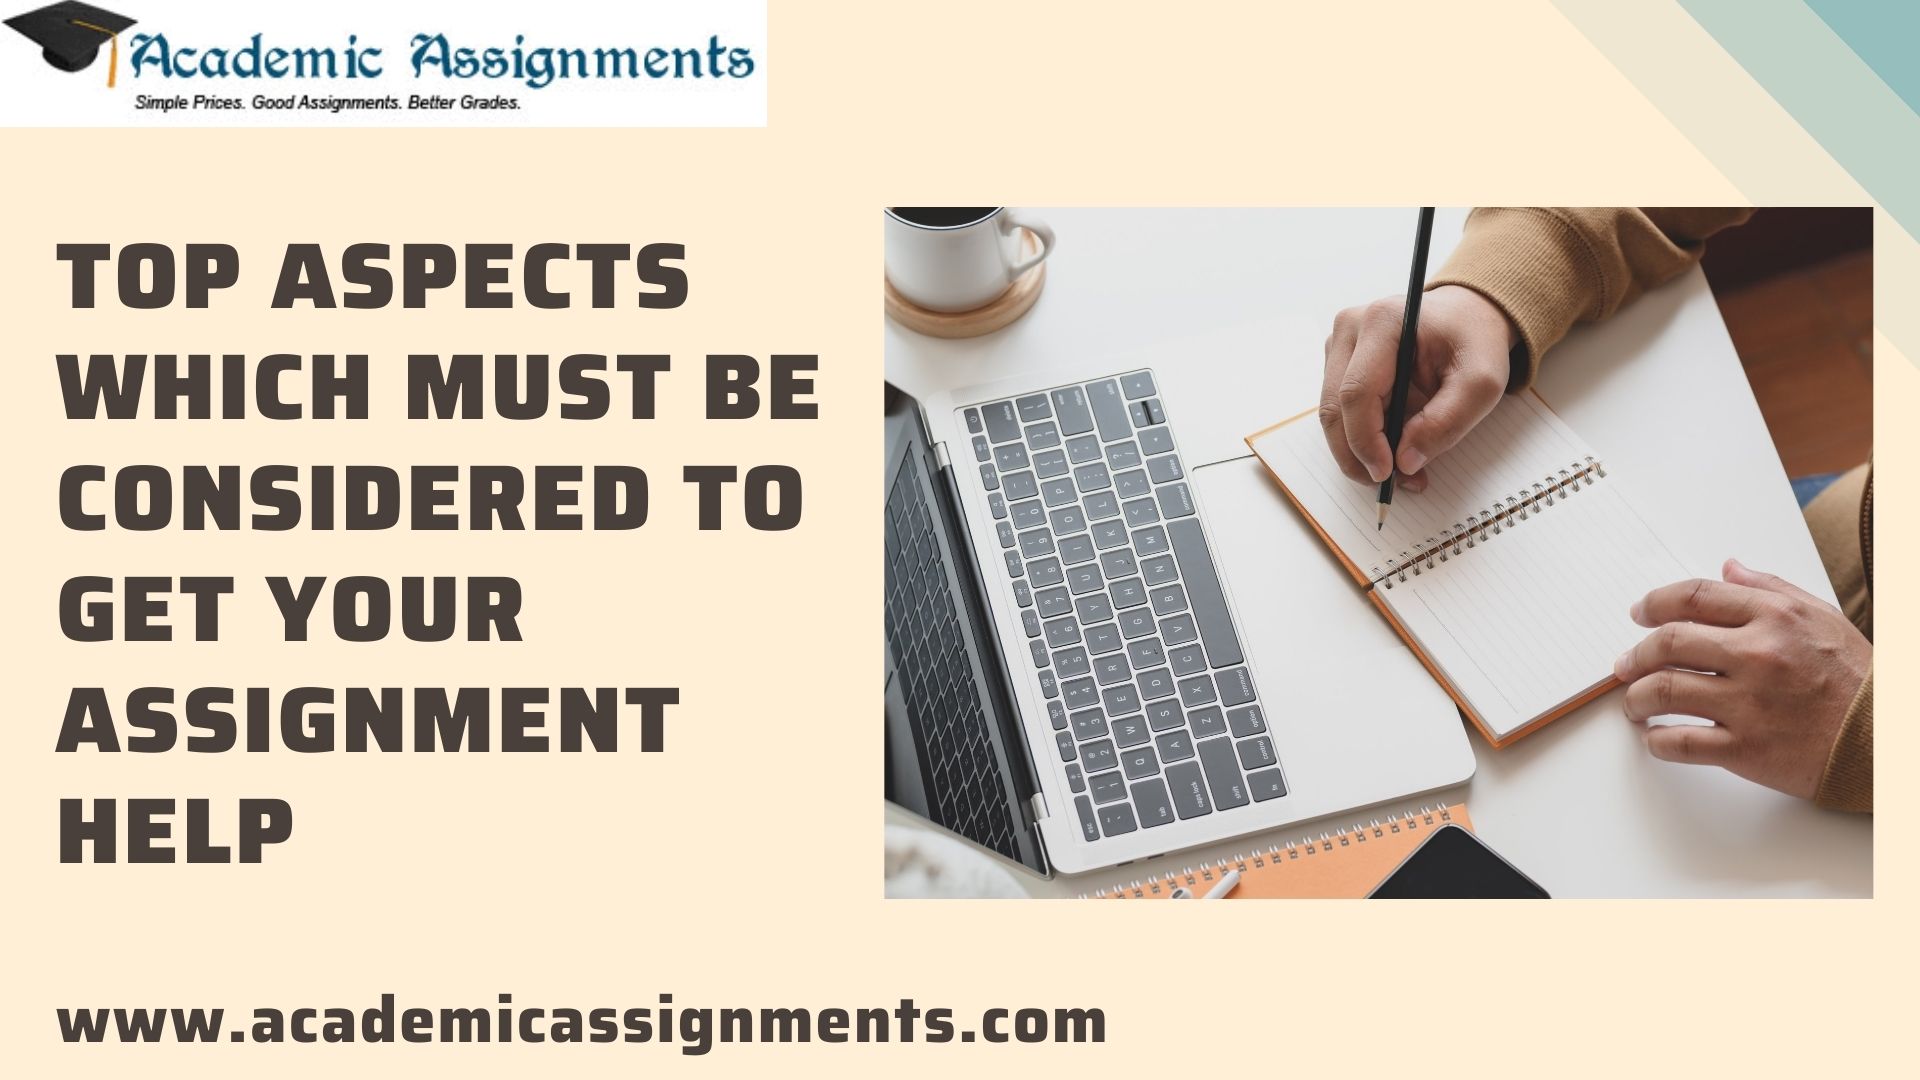 ASPECTS WHICH MUST BE CONSIDERED FOR ASSIGNMENT HELP